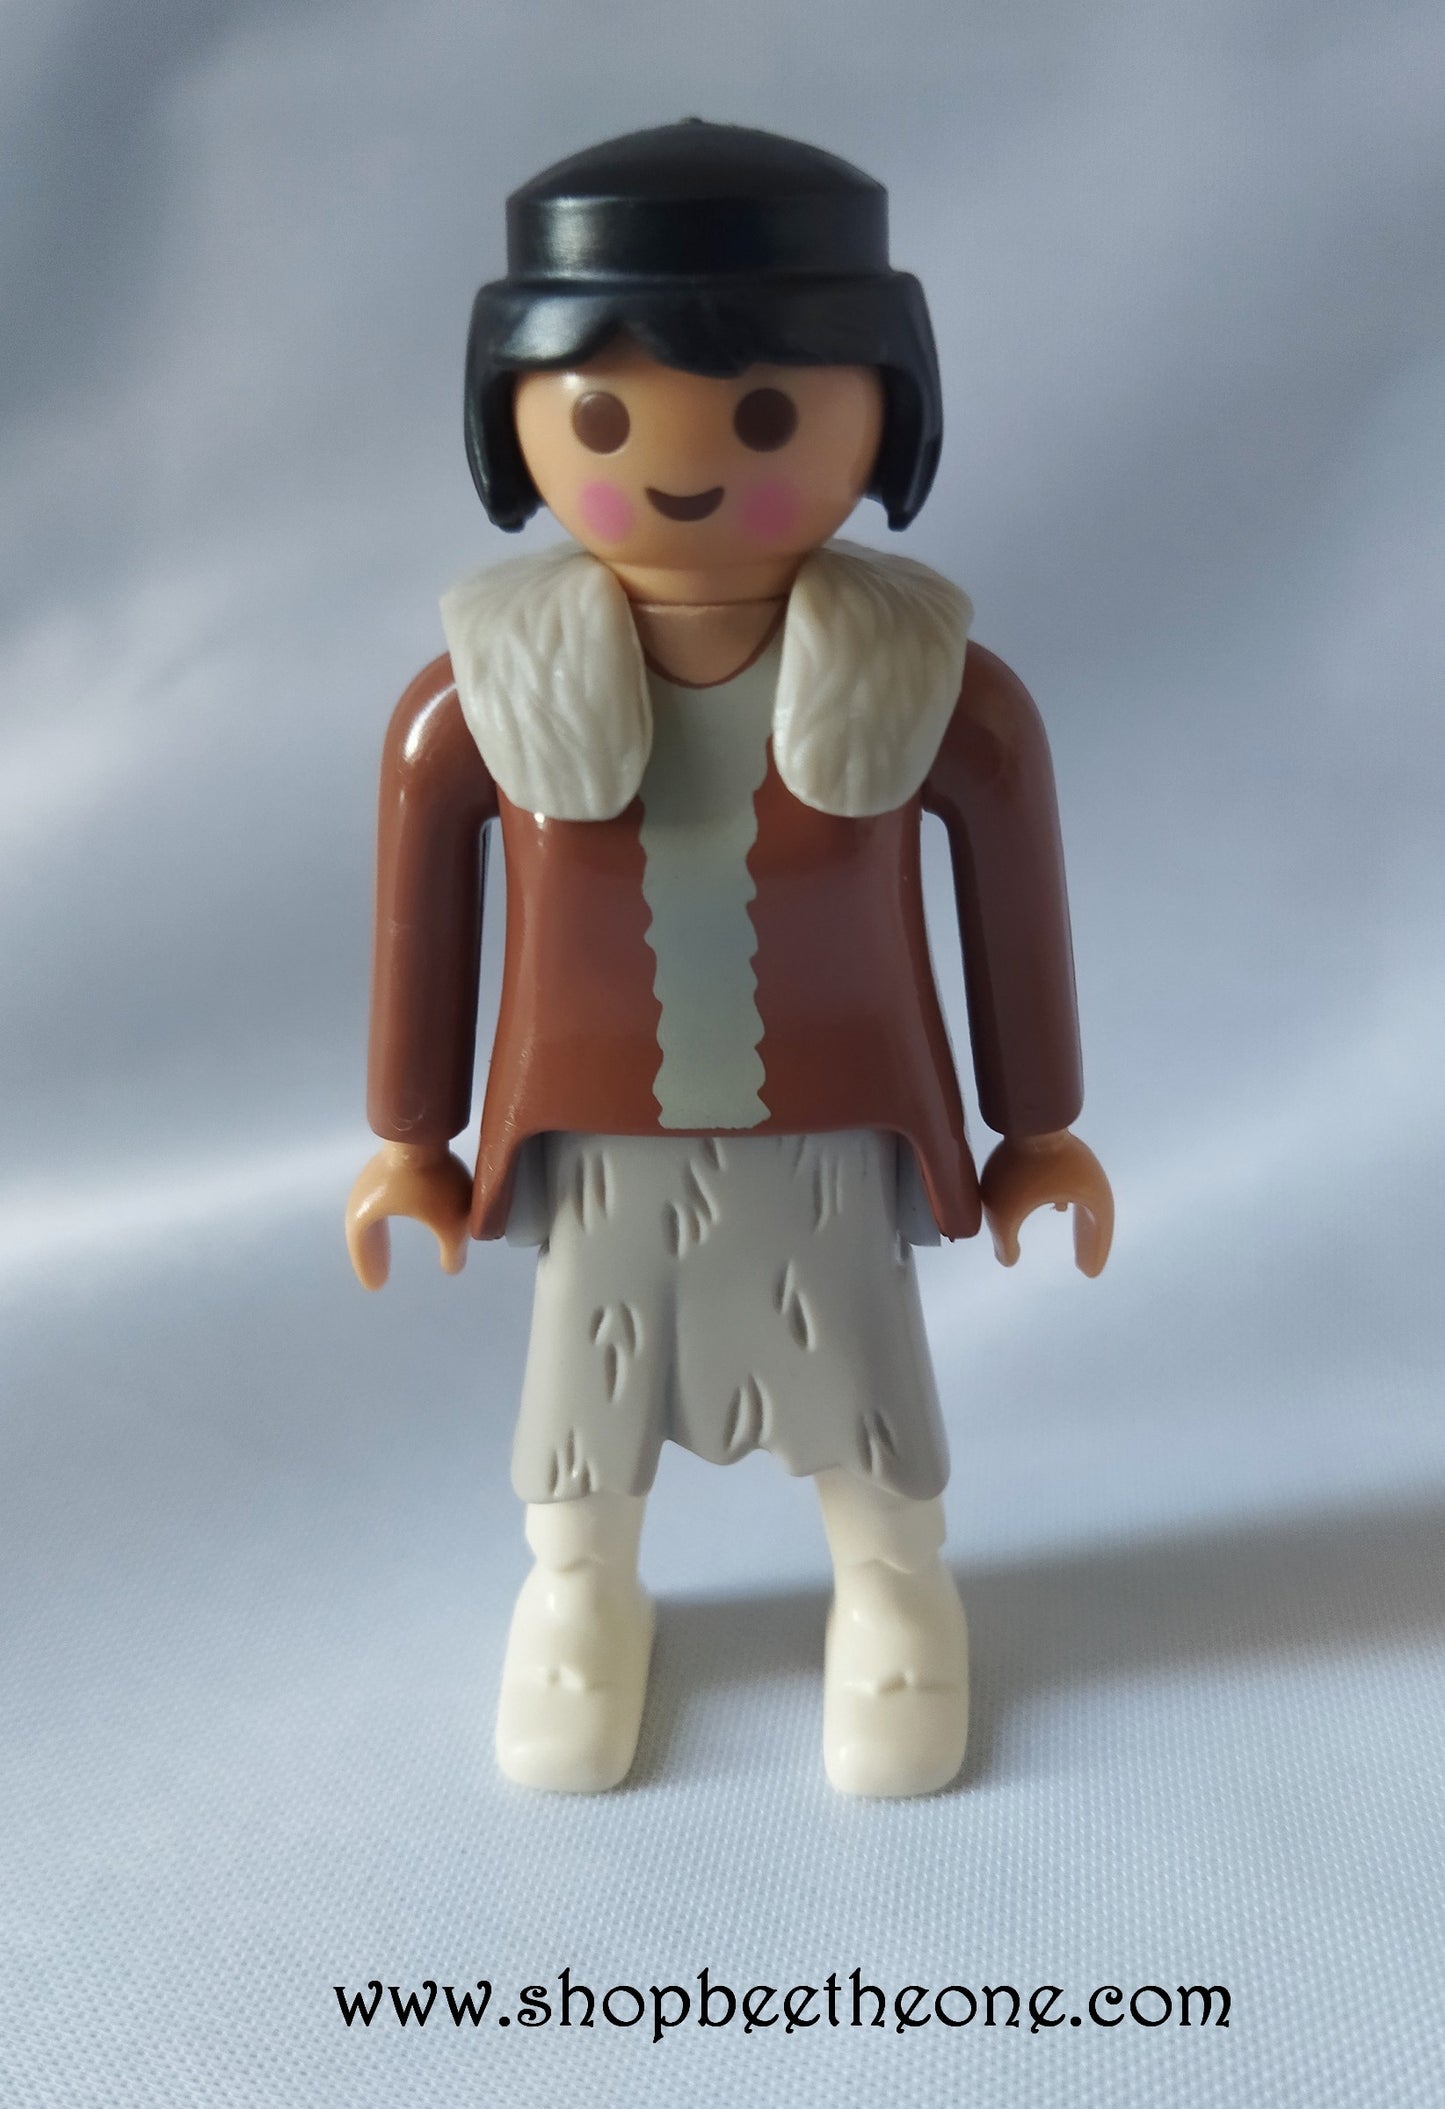 Collection Les Globe-trotteurs - Playmobil/Quick 2021 - Figurine Klicky Femme Inuit